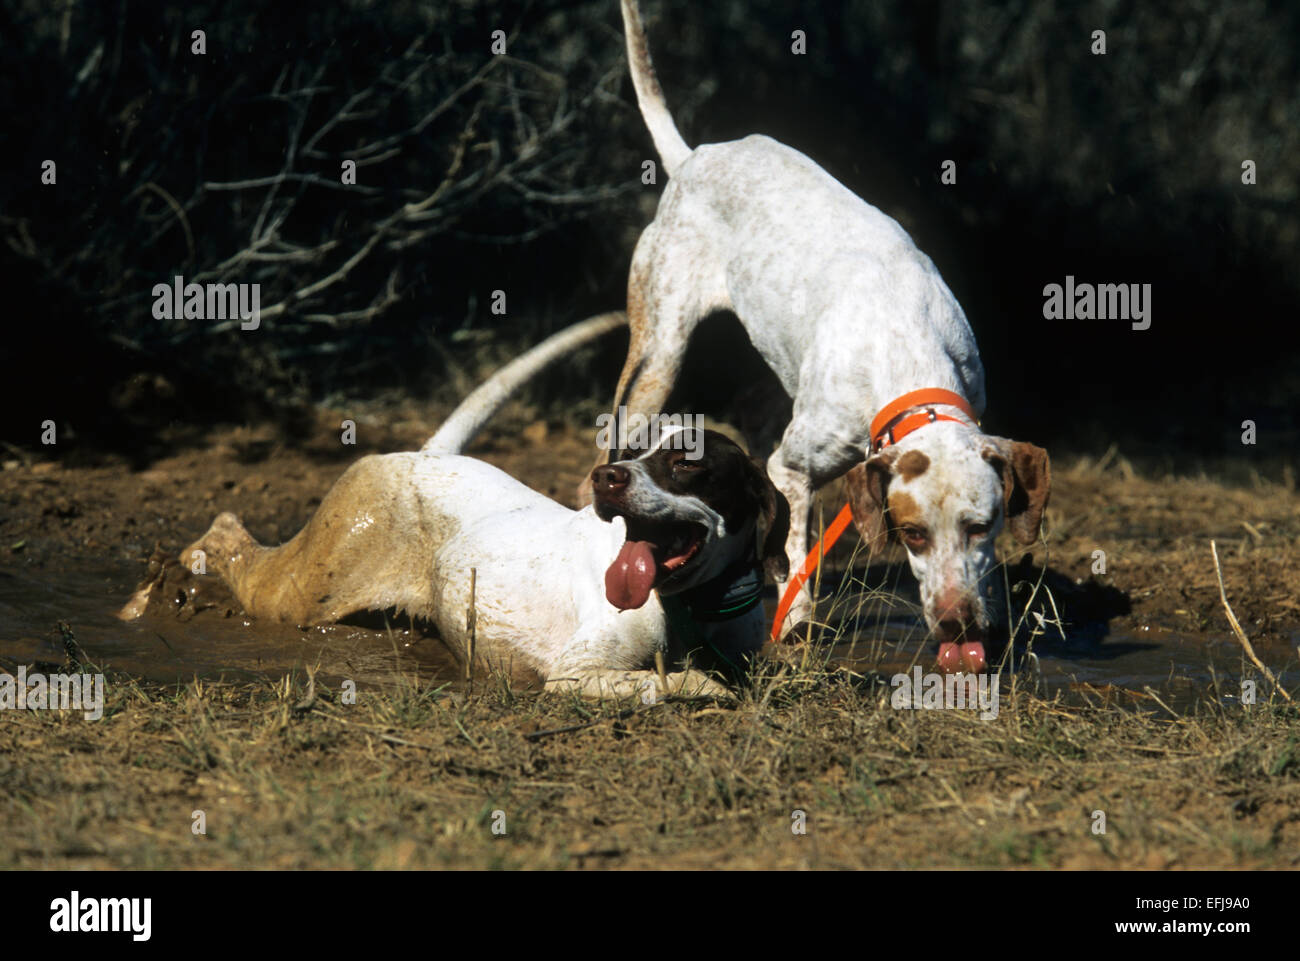 An English Pointer dog drinks from a mud puddle on a hit day of quail hunting South Texas Stock Photo